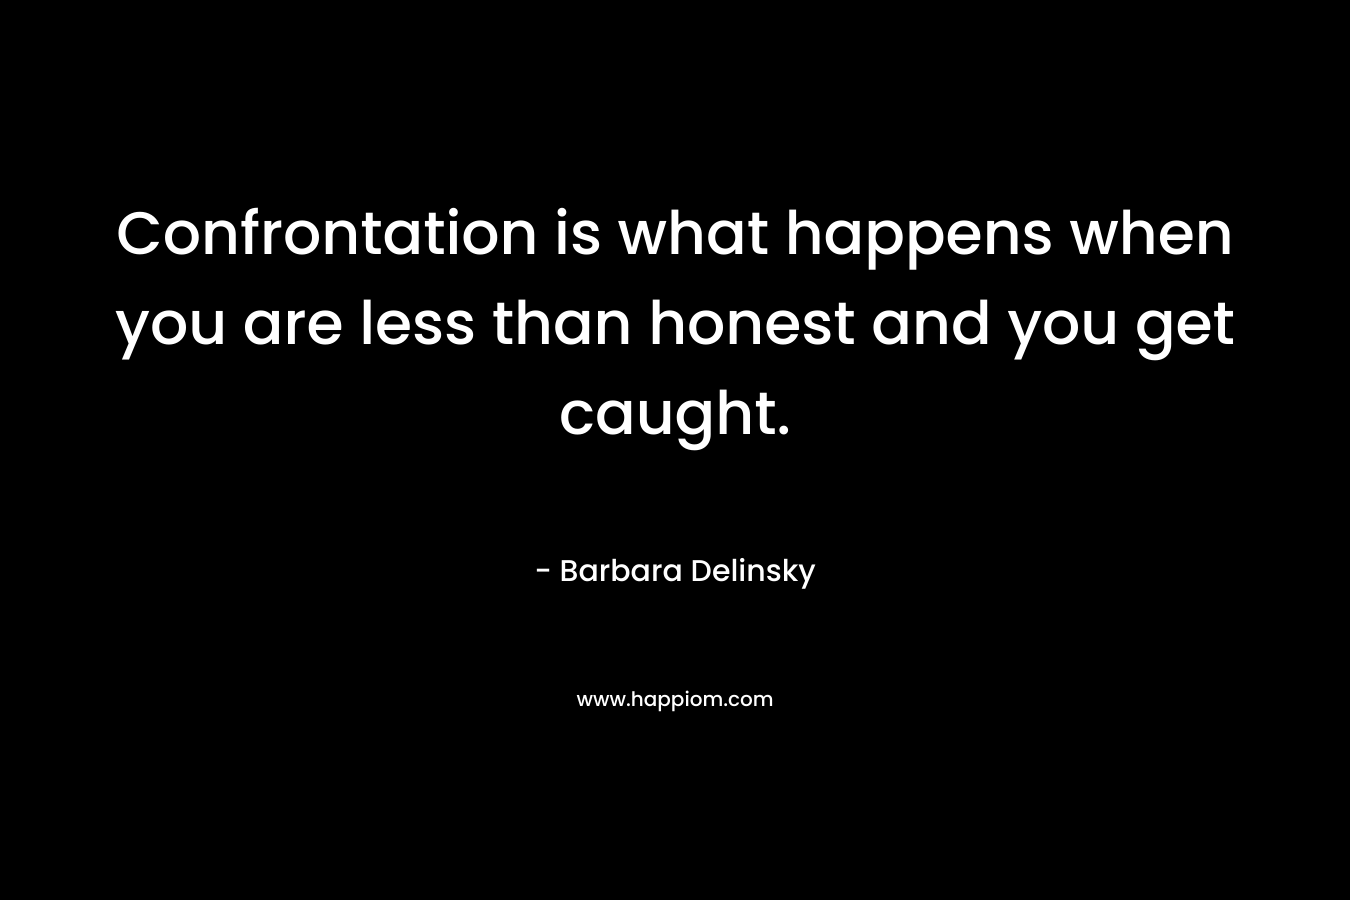 Confrontation is what happens when you are less than honest and you get caught.